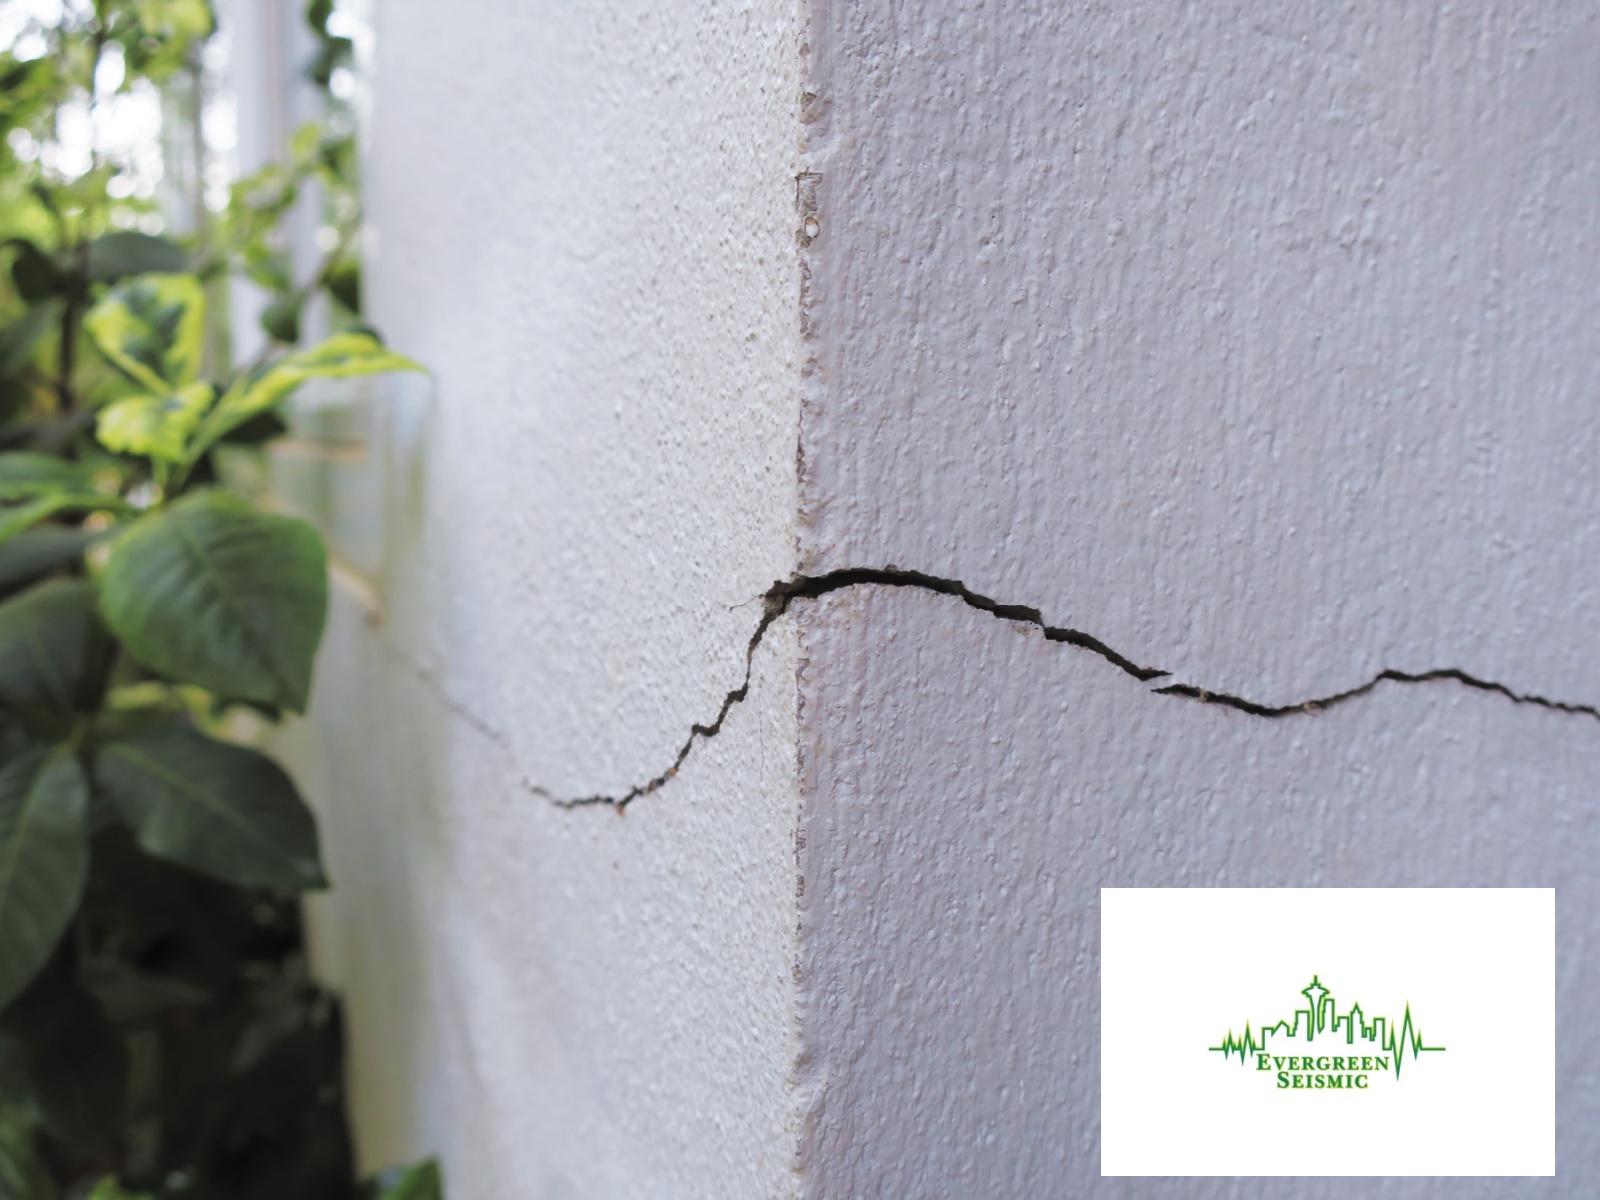 The Basics of Retrofitting - Is Your Home Earthquake-Ready?